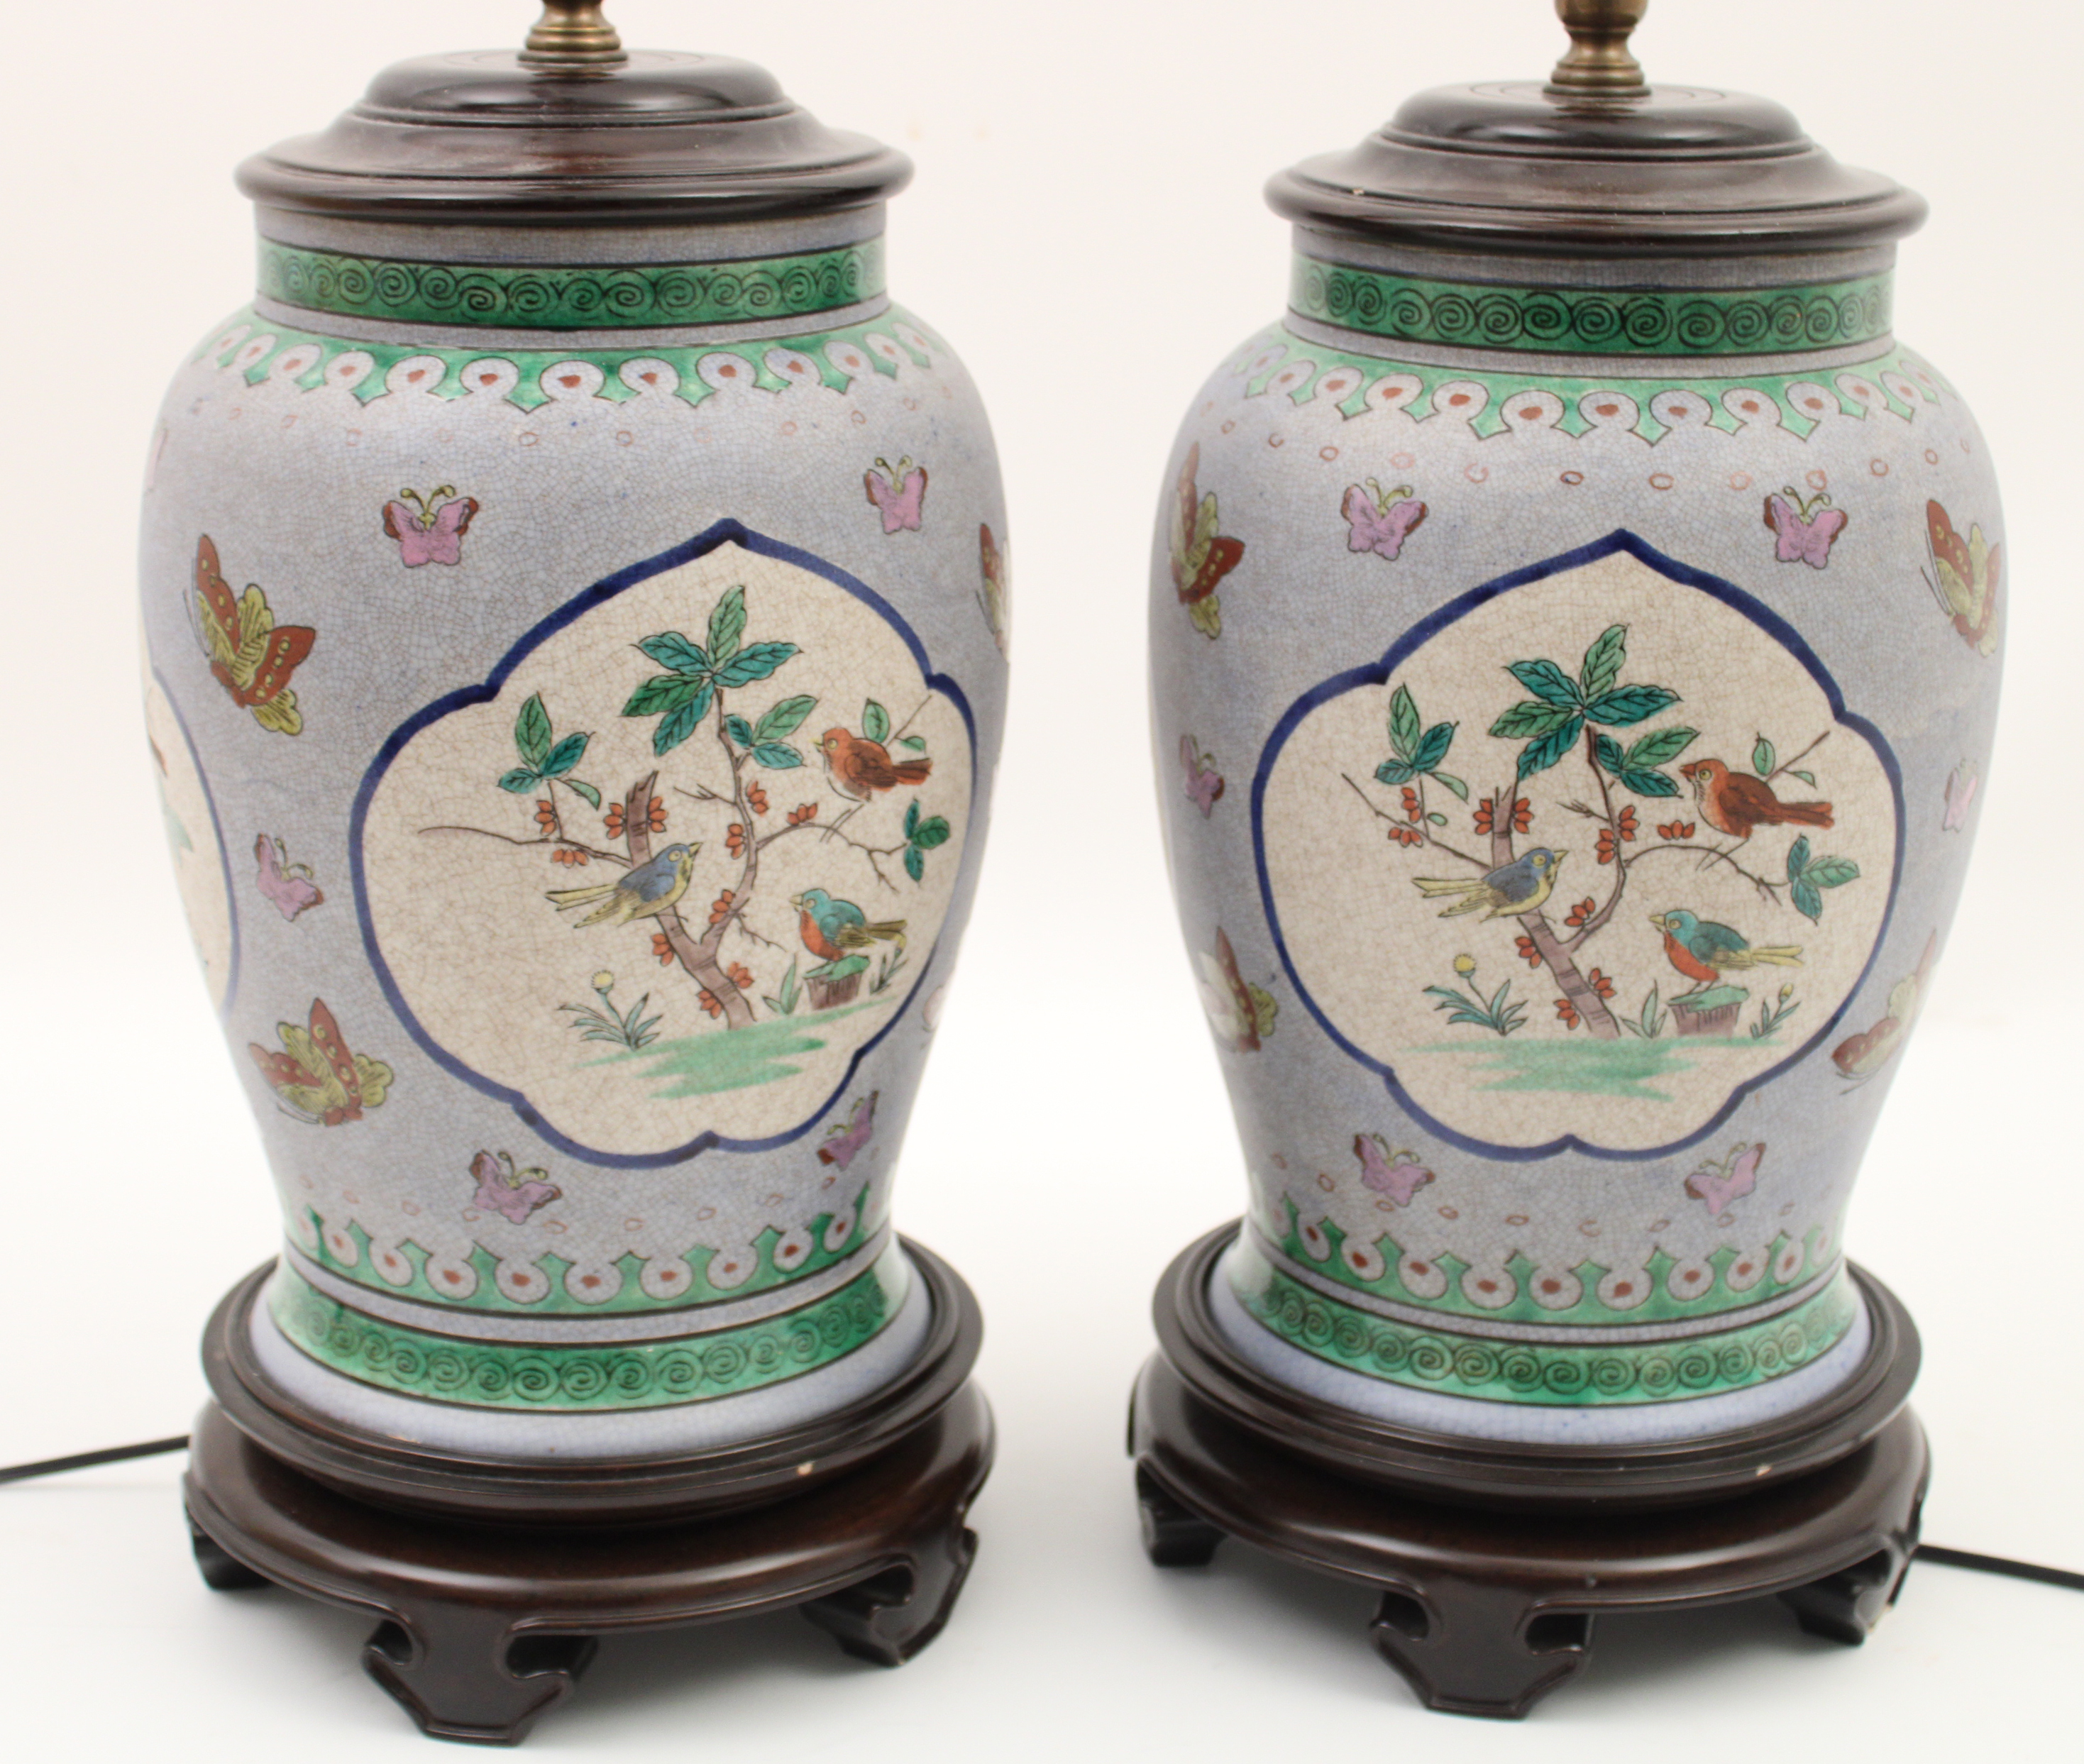 PAIR OF CHINESE PORCELAIN LAMPS 2c89bc